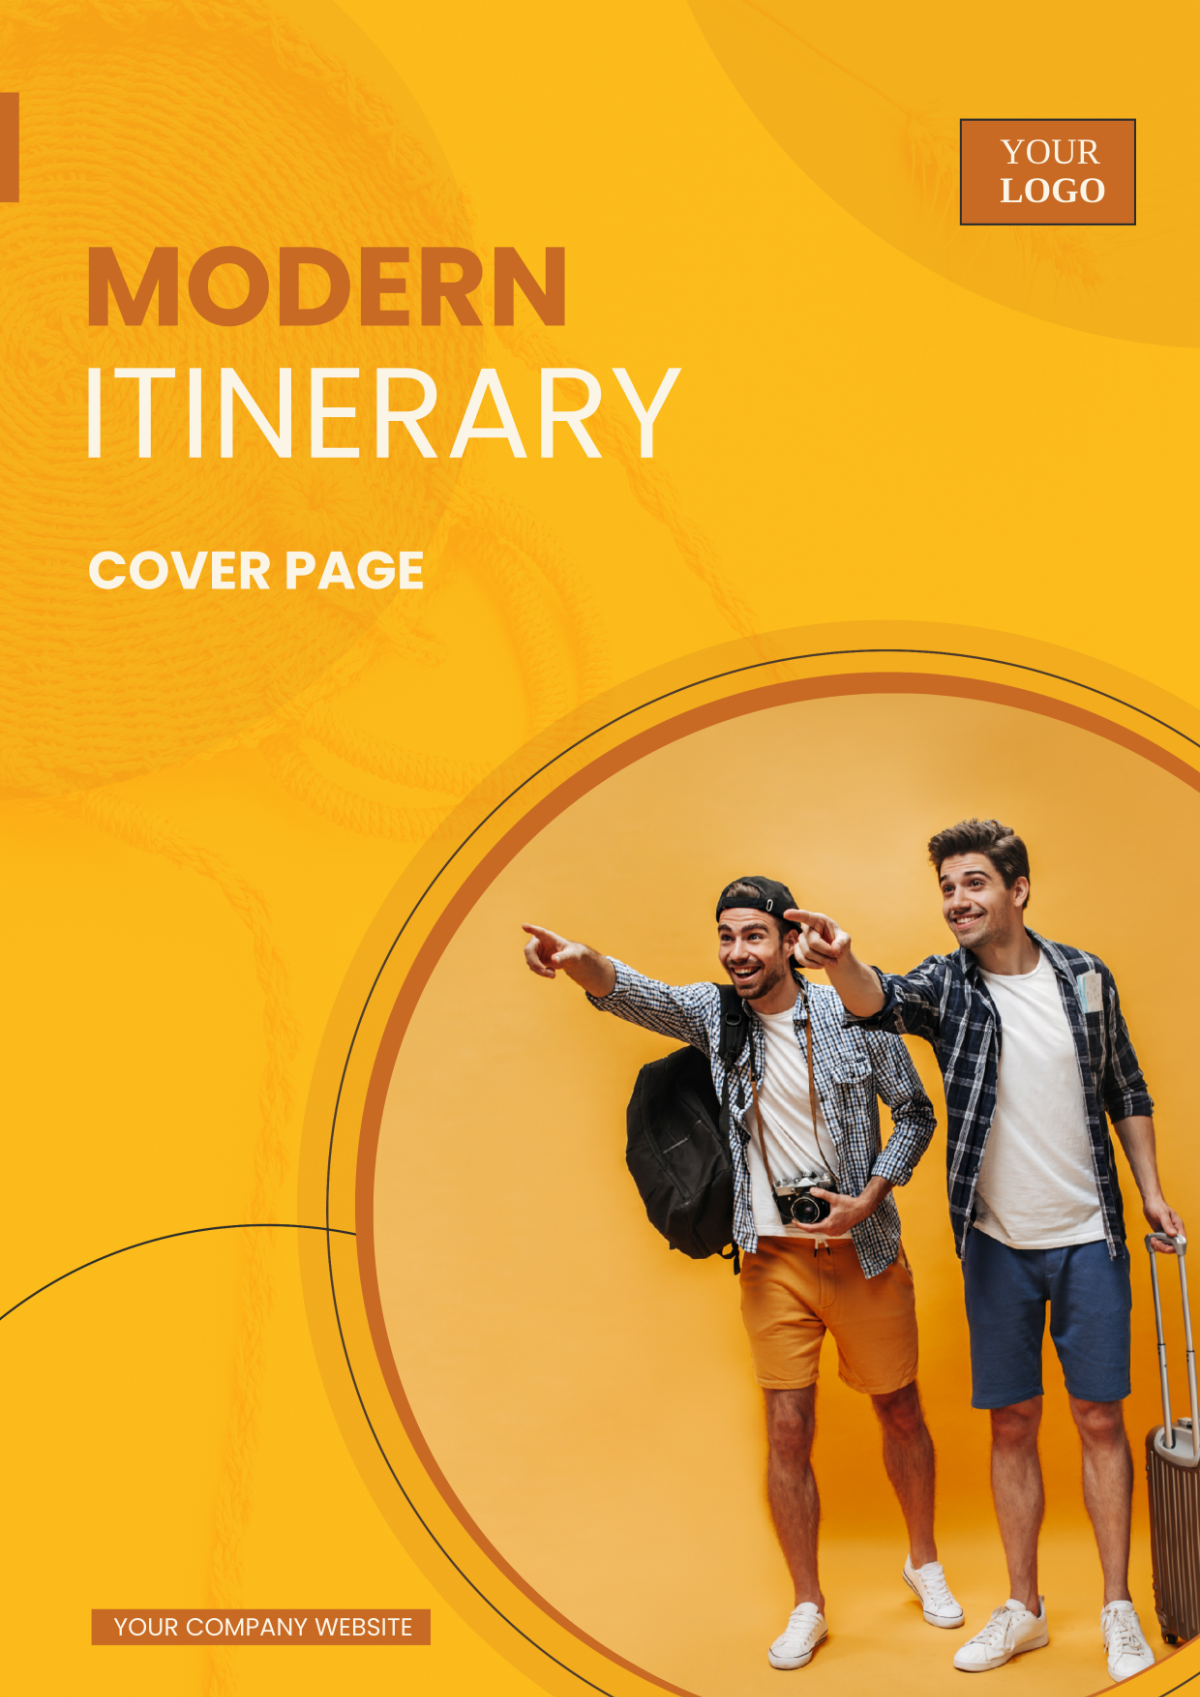 Modern Itinerary Cover Page